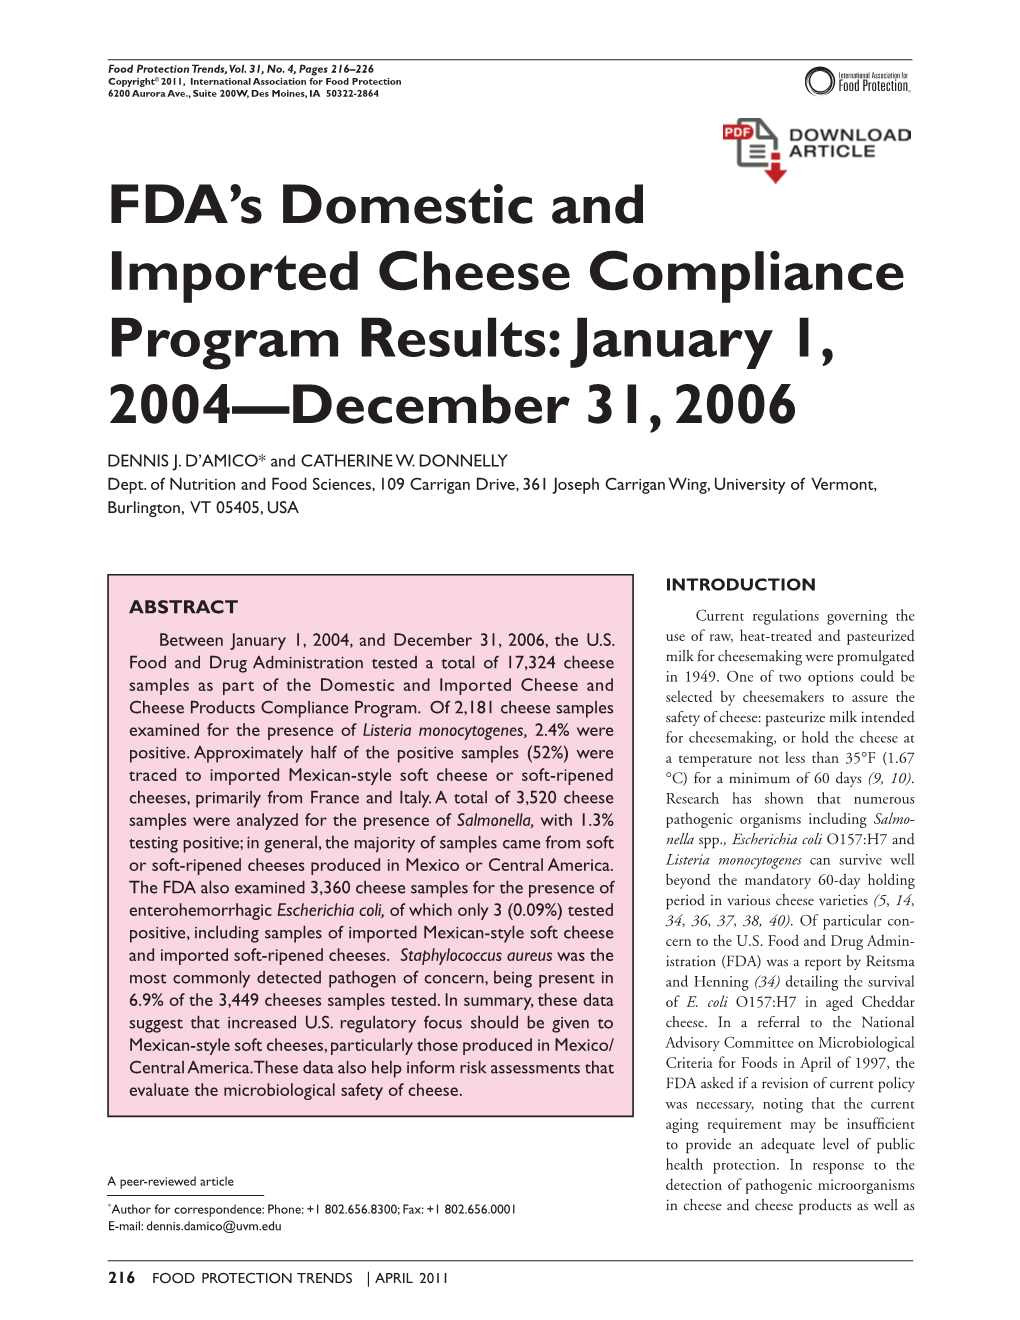 FDA's Domestic and Imported Cheese Compliance Program Results